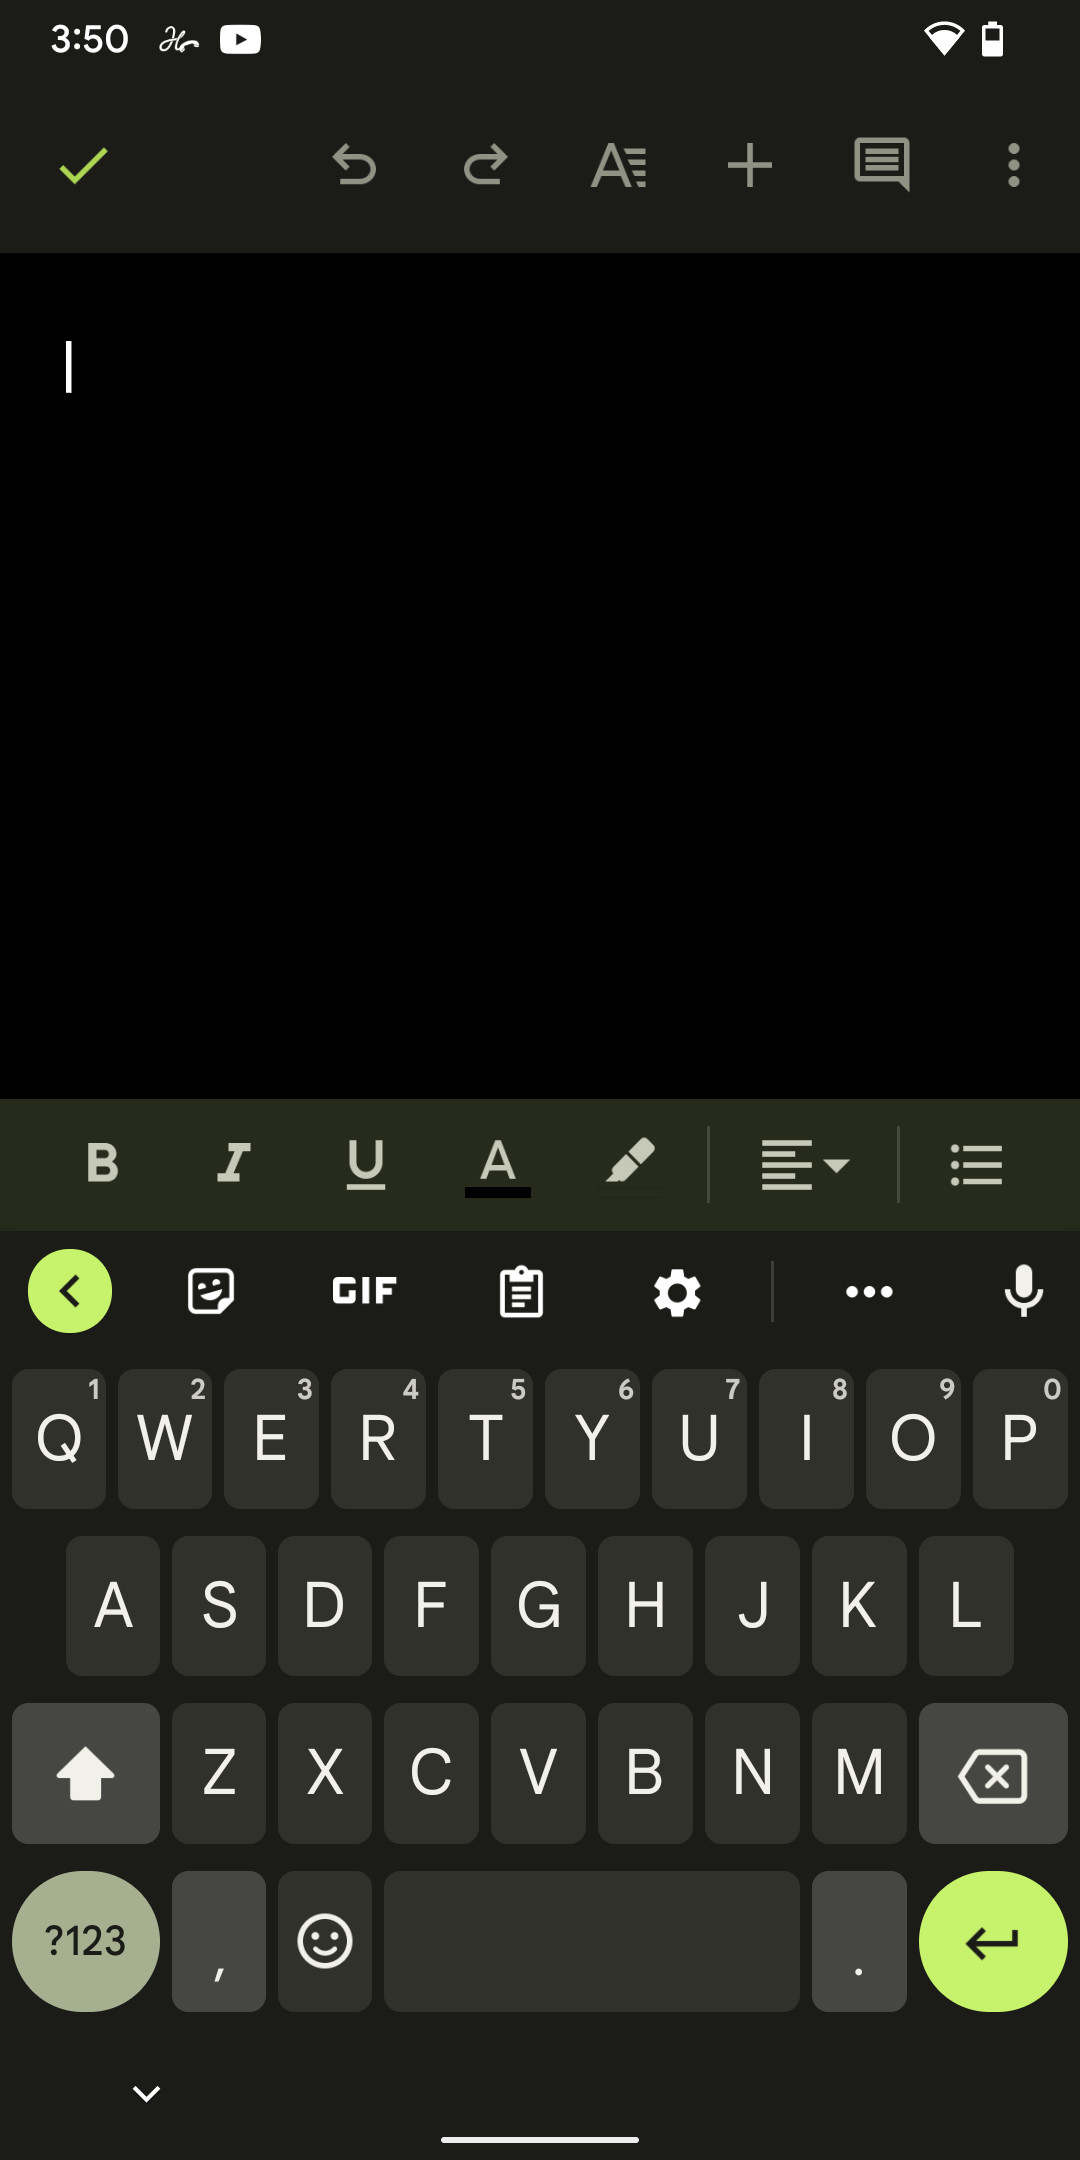 How To Switch Languages Using The Android Gboard Keyboard Dlsserve 3081